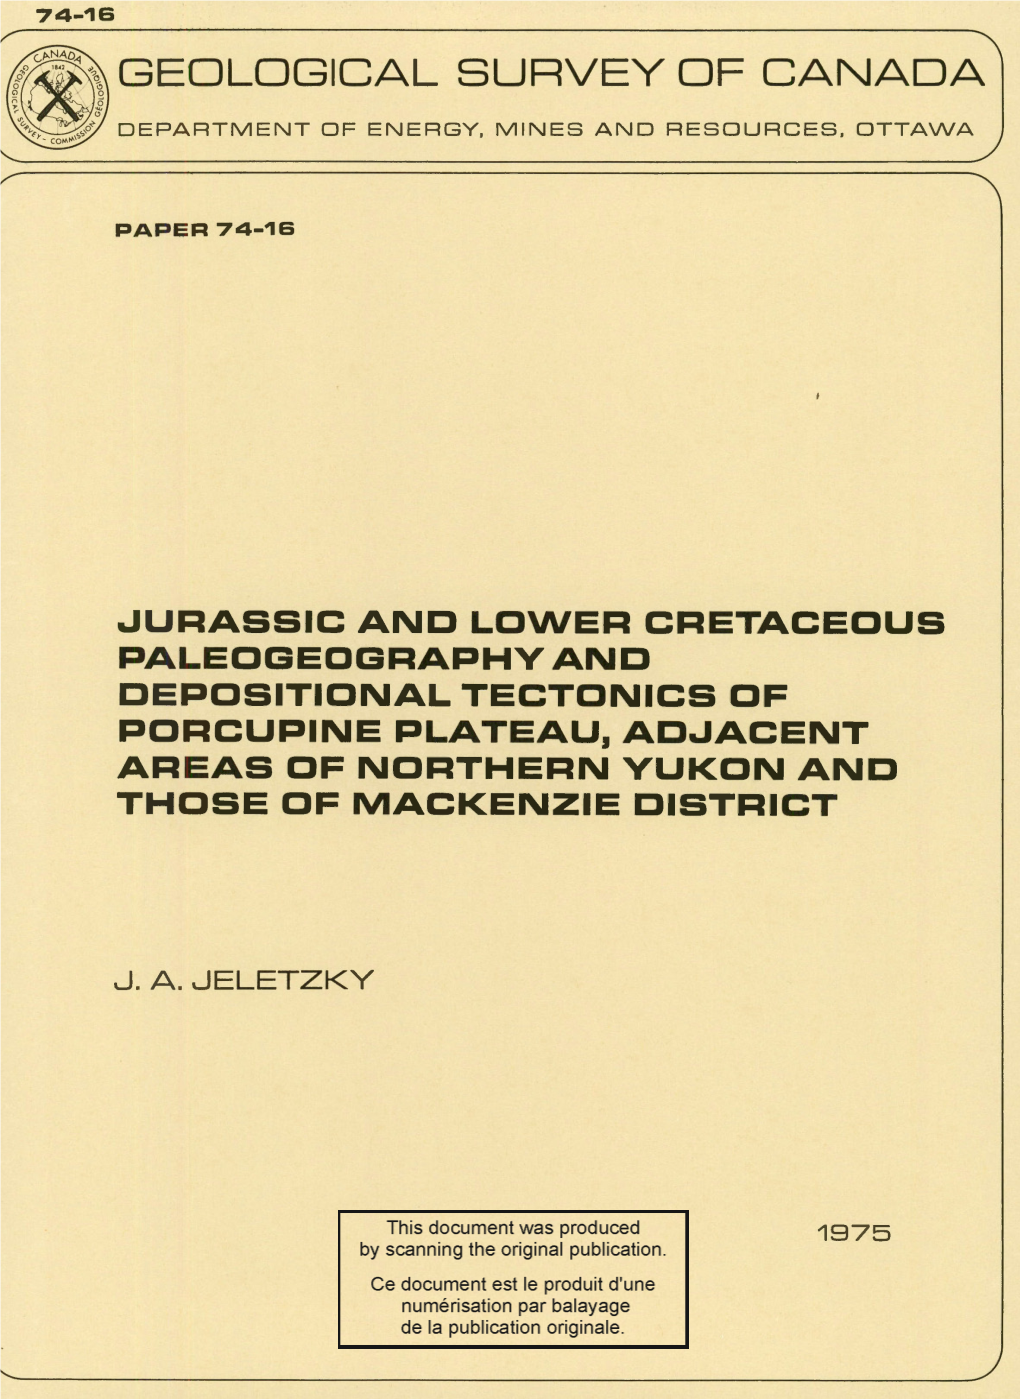 Jurassic and Lo\Ner Cretaceous Paleogeographv and Depositional Tectonics of Porcupine Plateau, Adjacent Areas of Northern Yukon and Those of Mackenzie District